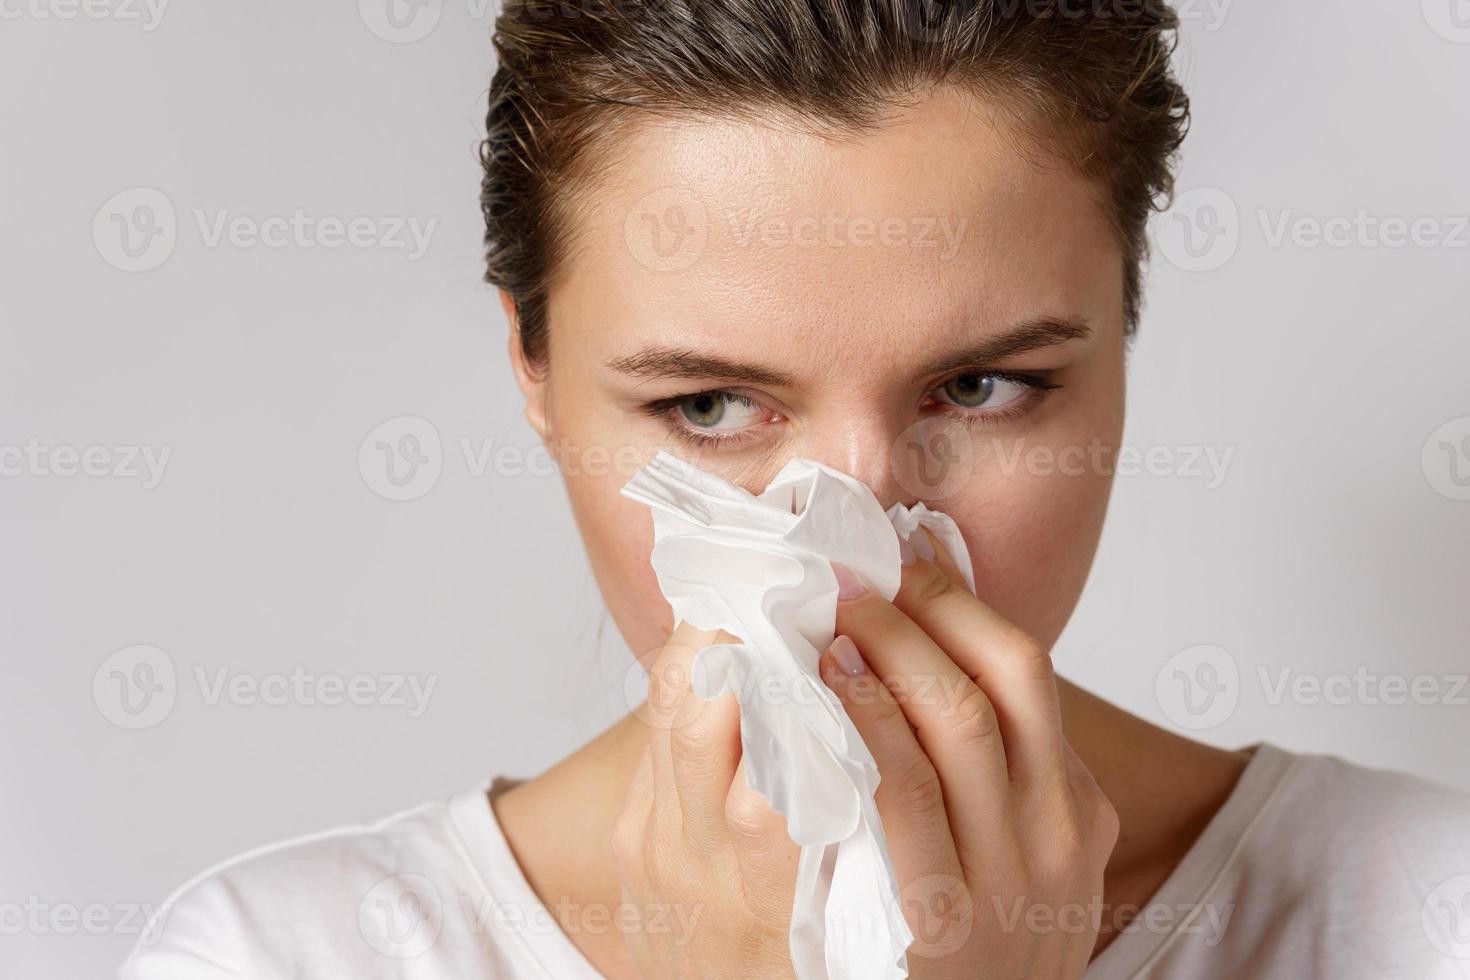 Young woman with a runny nose symptom photo